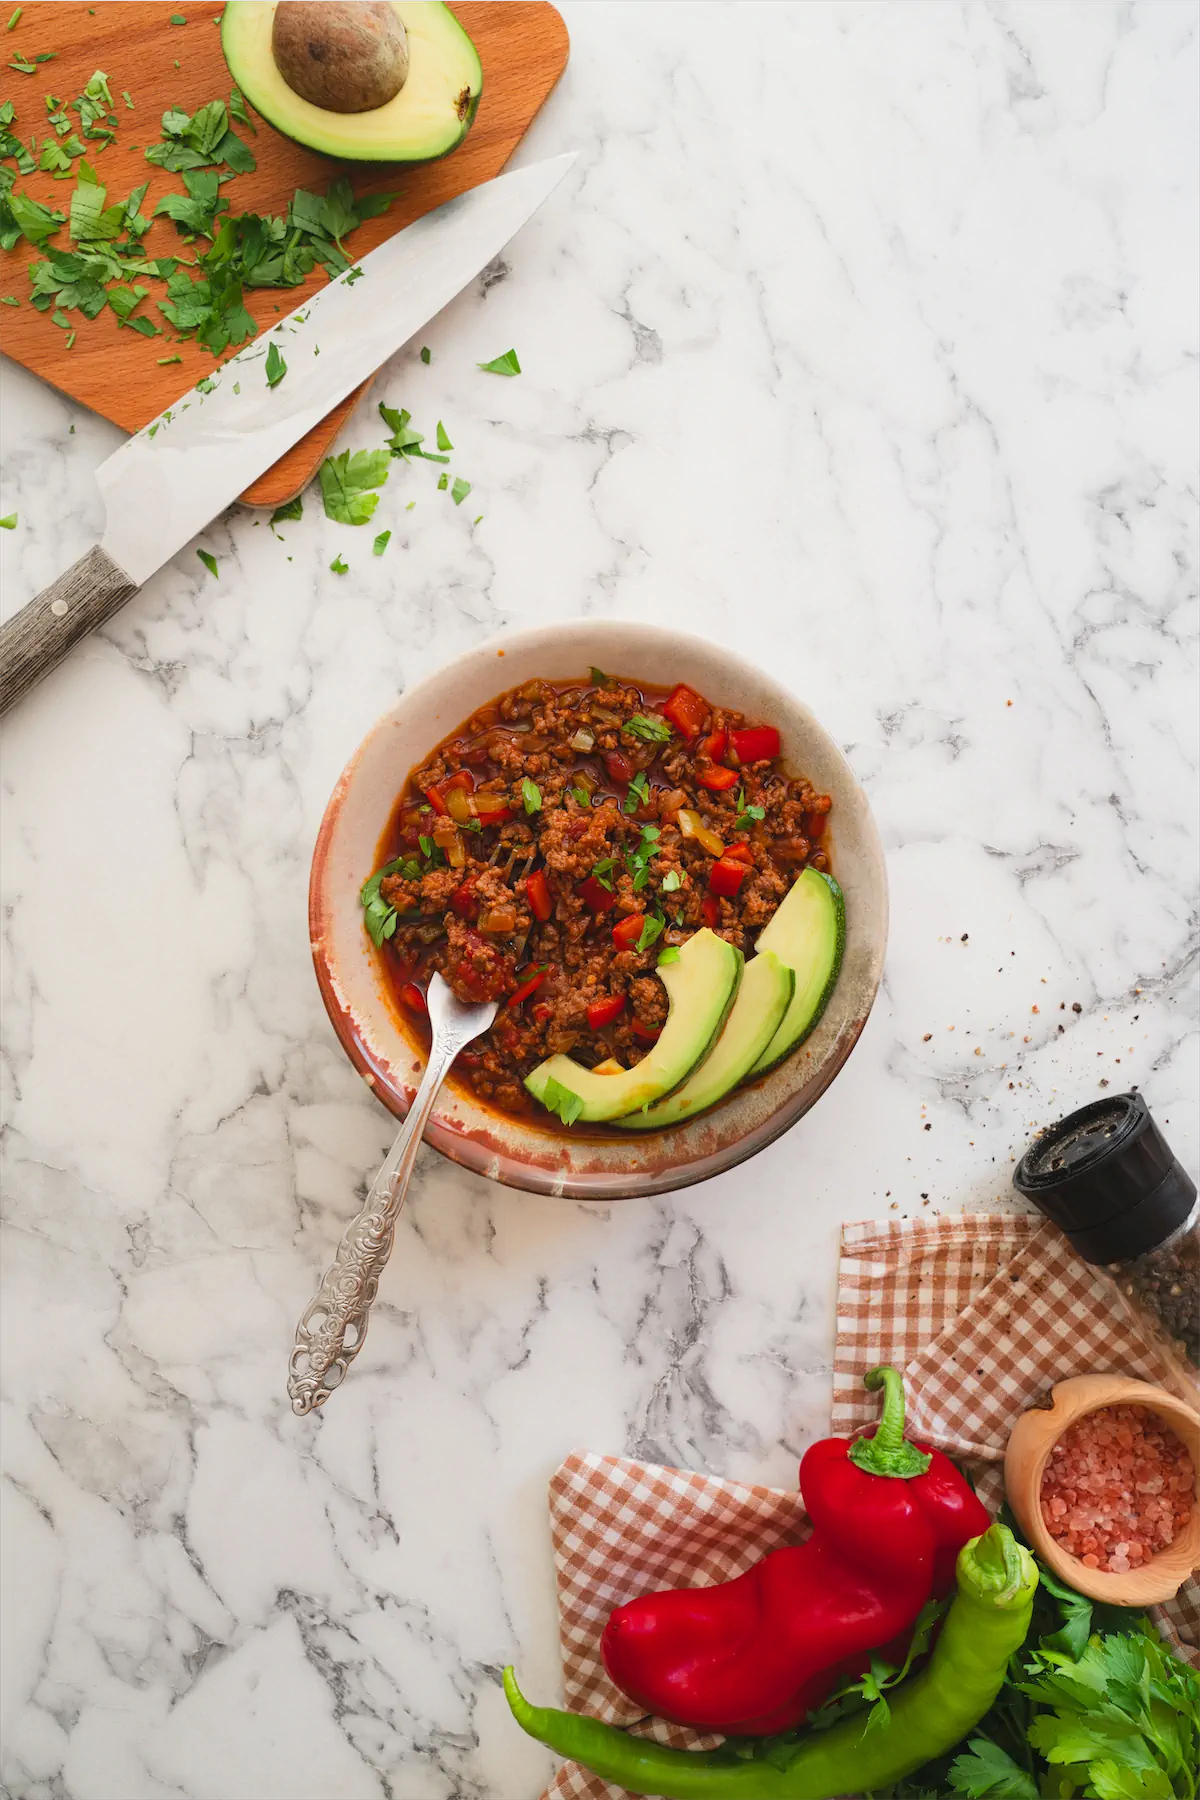 Keto chili con carne presented in a bowl with avocado slices and a spoon.